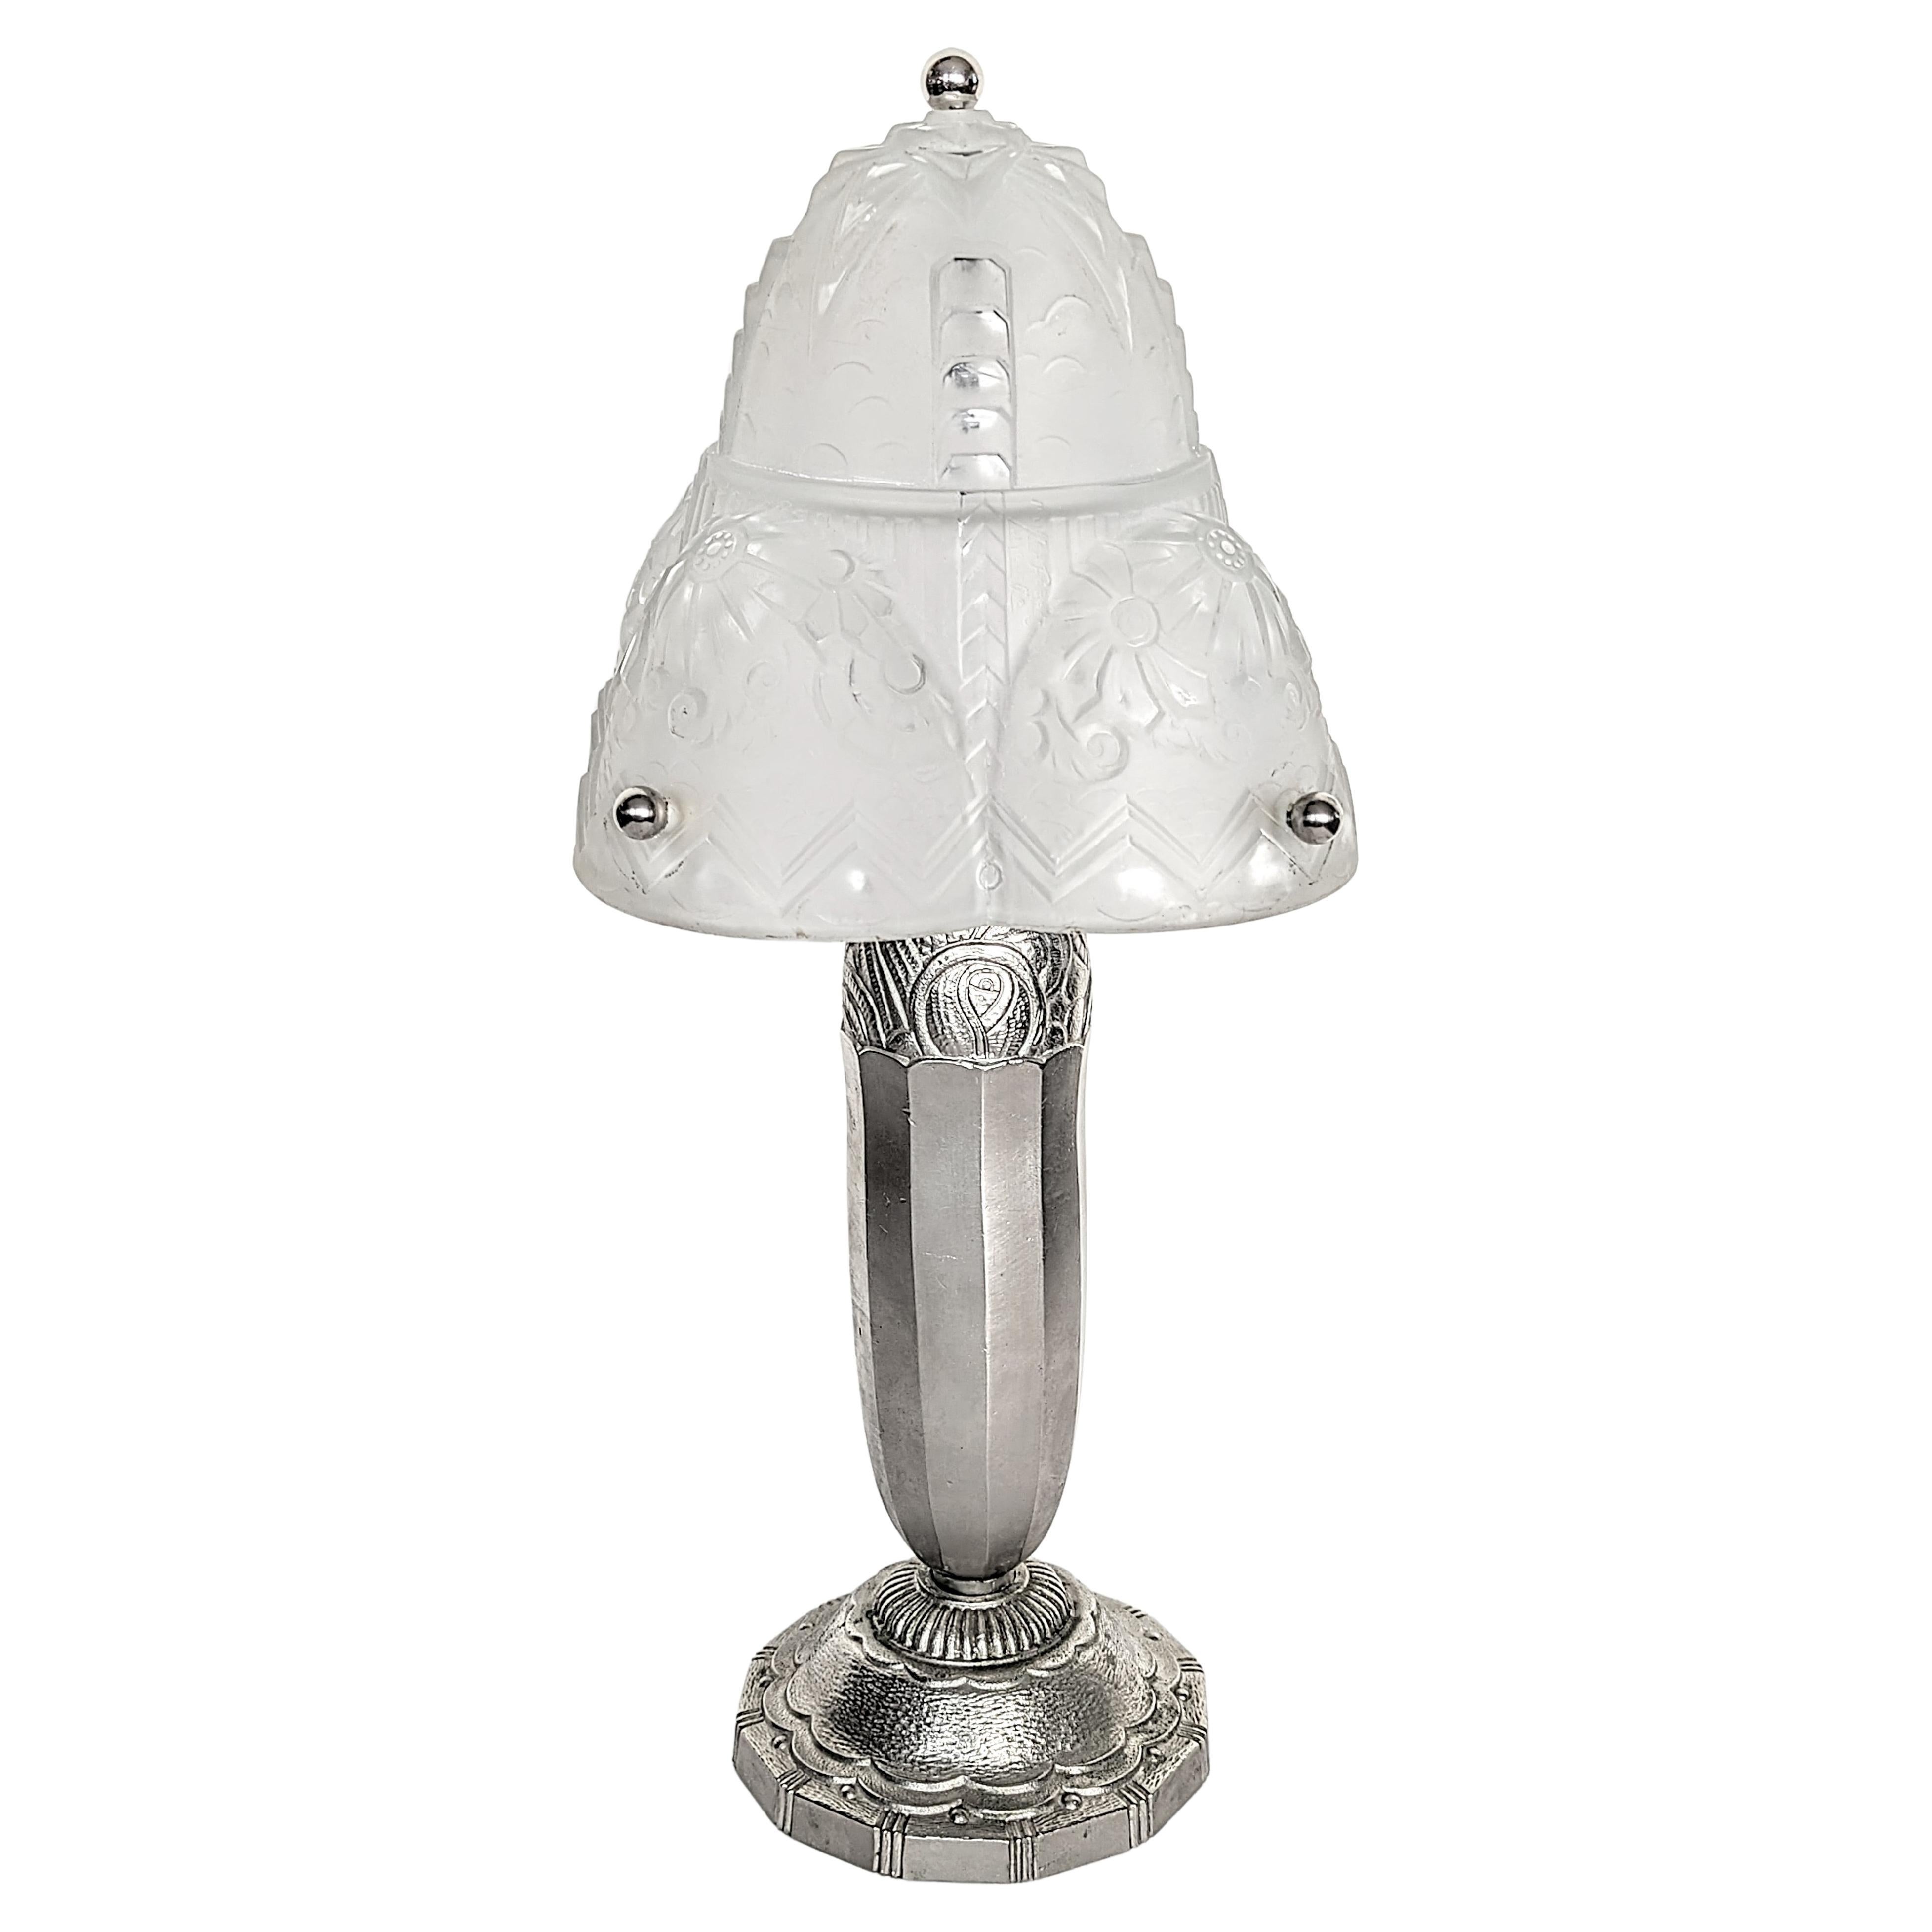 A stunning French Art Deco table lamp was created and signed by Muller Frères in great condition. The shade is enhanced by a geometric motif in frosted glass with polished details. Mounted on a Nickeled Bronze with a flower design base. Each lamp